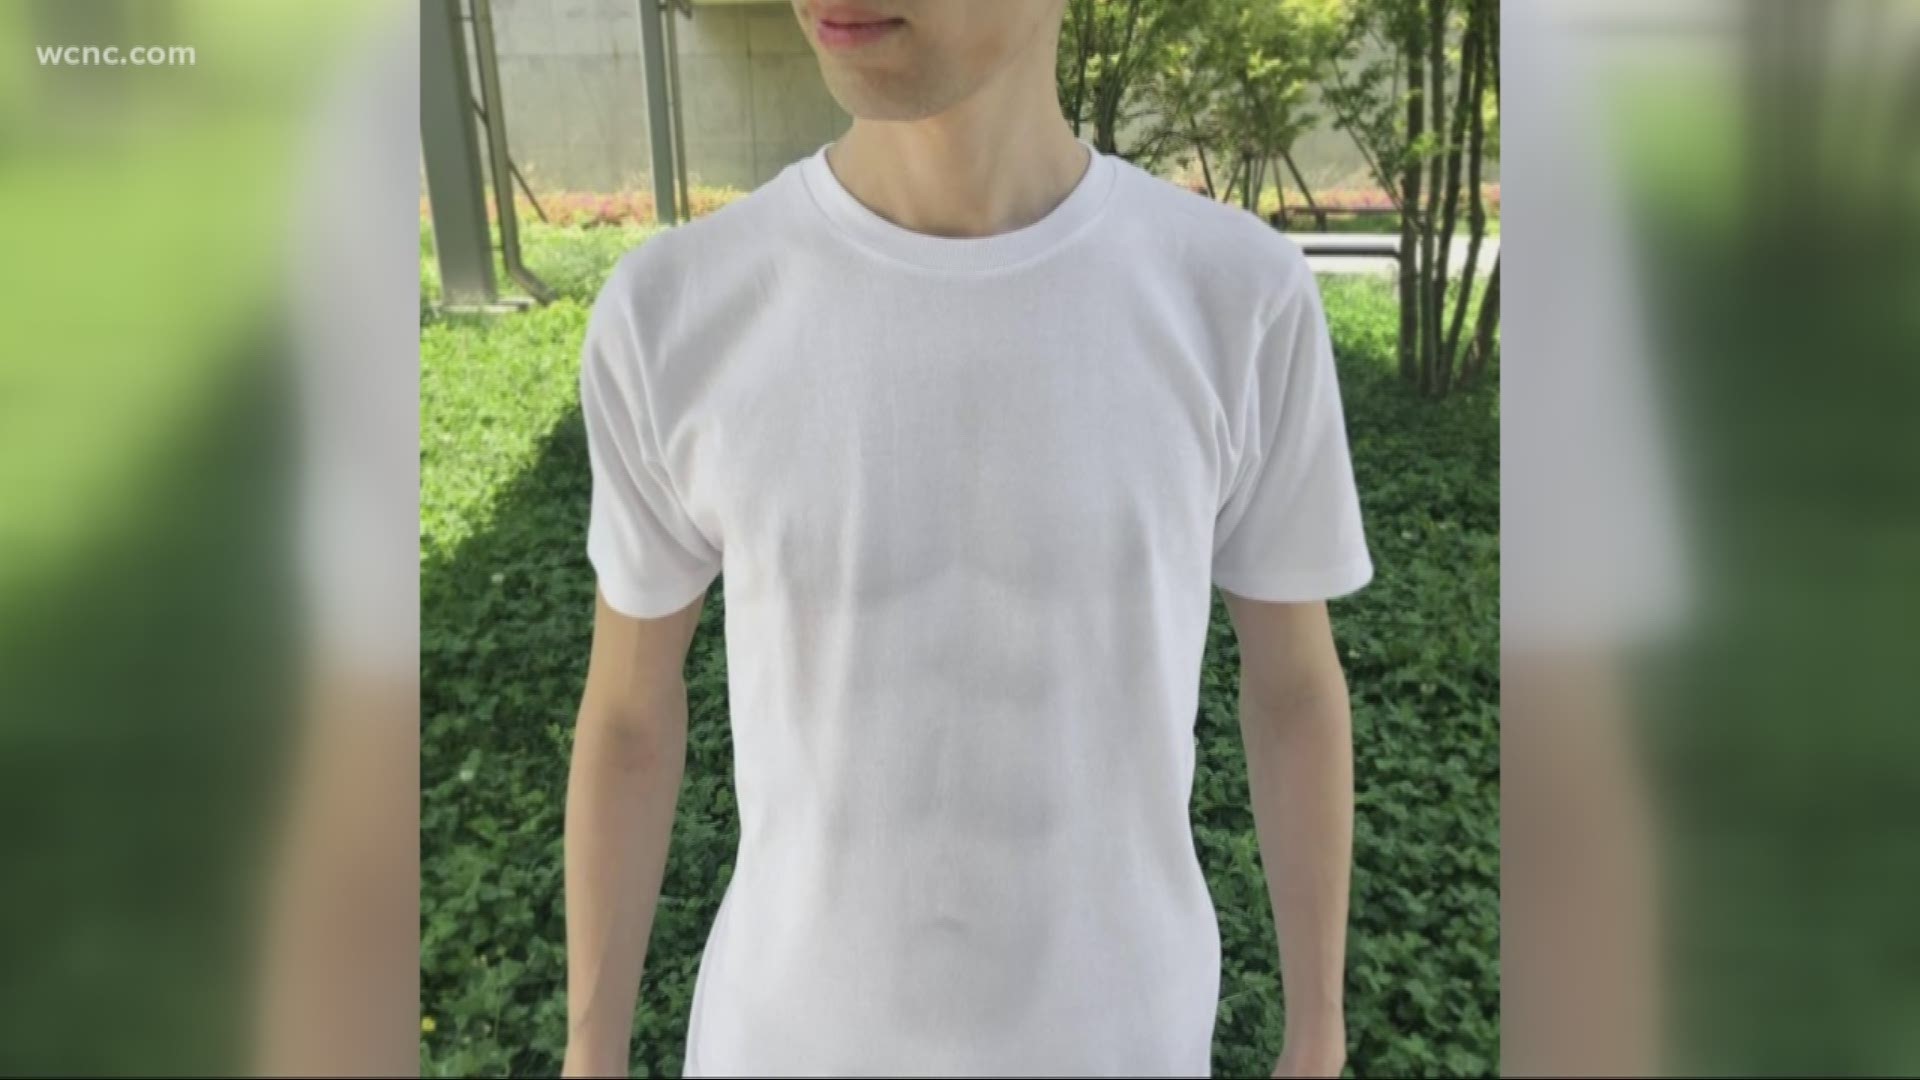 industri Sølv lede efter This t-shirt gives the illusion that you have six-pack abs | wcnc.com